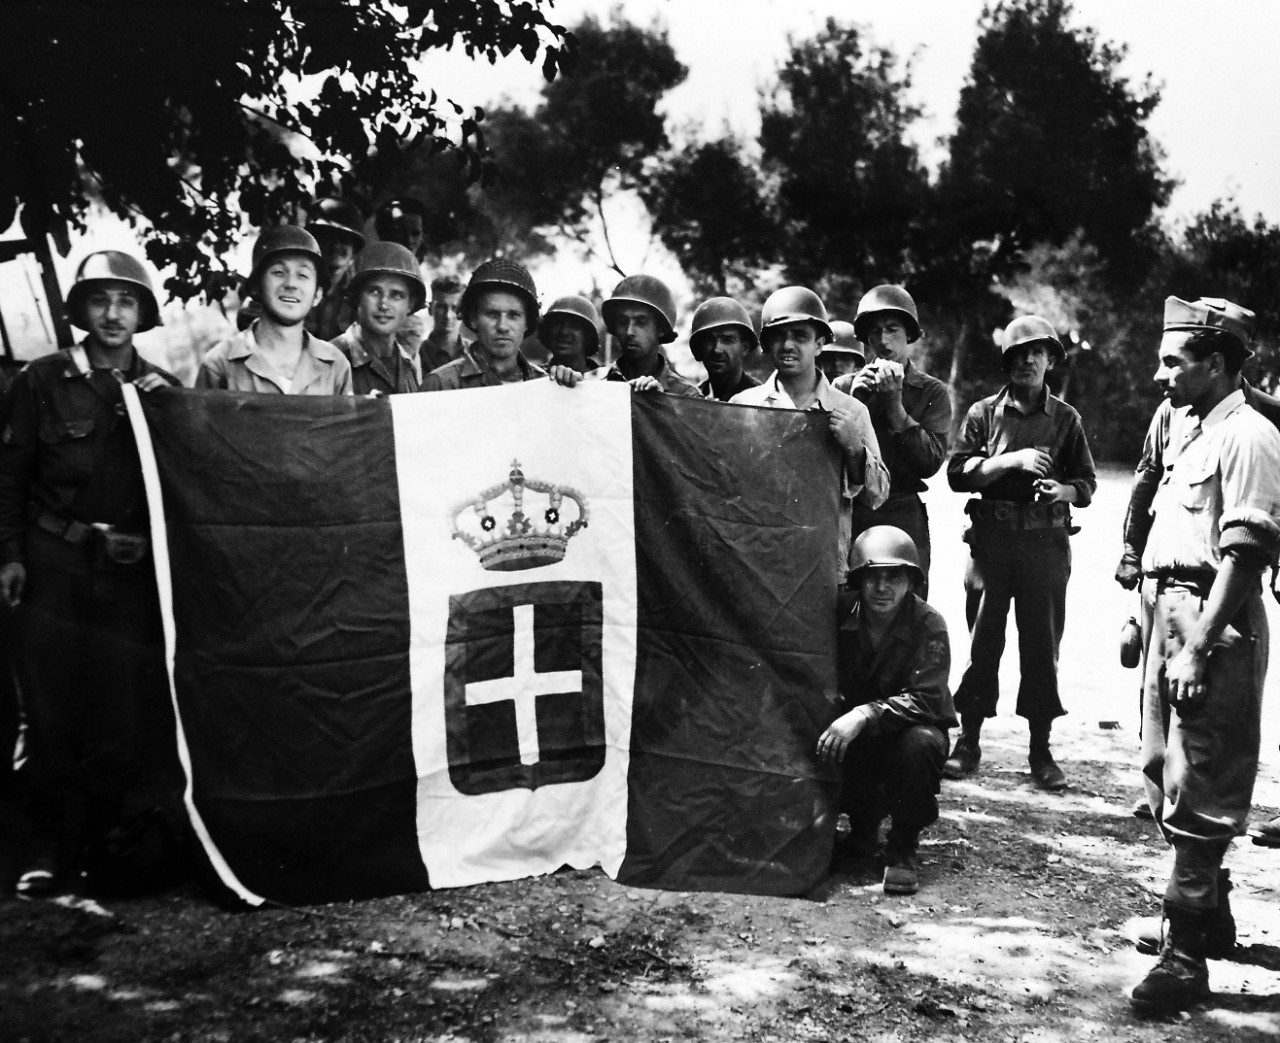 26-G-1994:   Operation Avalanche, September 1943.   Surrendered Colors.  U.S. Soldiers pose with a surrendered Italian flag for a Coast Guard photographer at a villa a few miles from the beach at Paestum, Italy.  An Italian soldier is shown at the extreme right.   Coast Guardsmen manned combat transports and landing craft in the invasion.  Official Coast Guard Photograph. Photographed through Mylar sleeve.   Courtesy of the Library of Congress: Lot-916.  (2016/05/19).